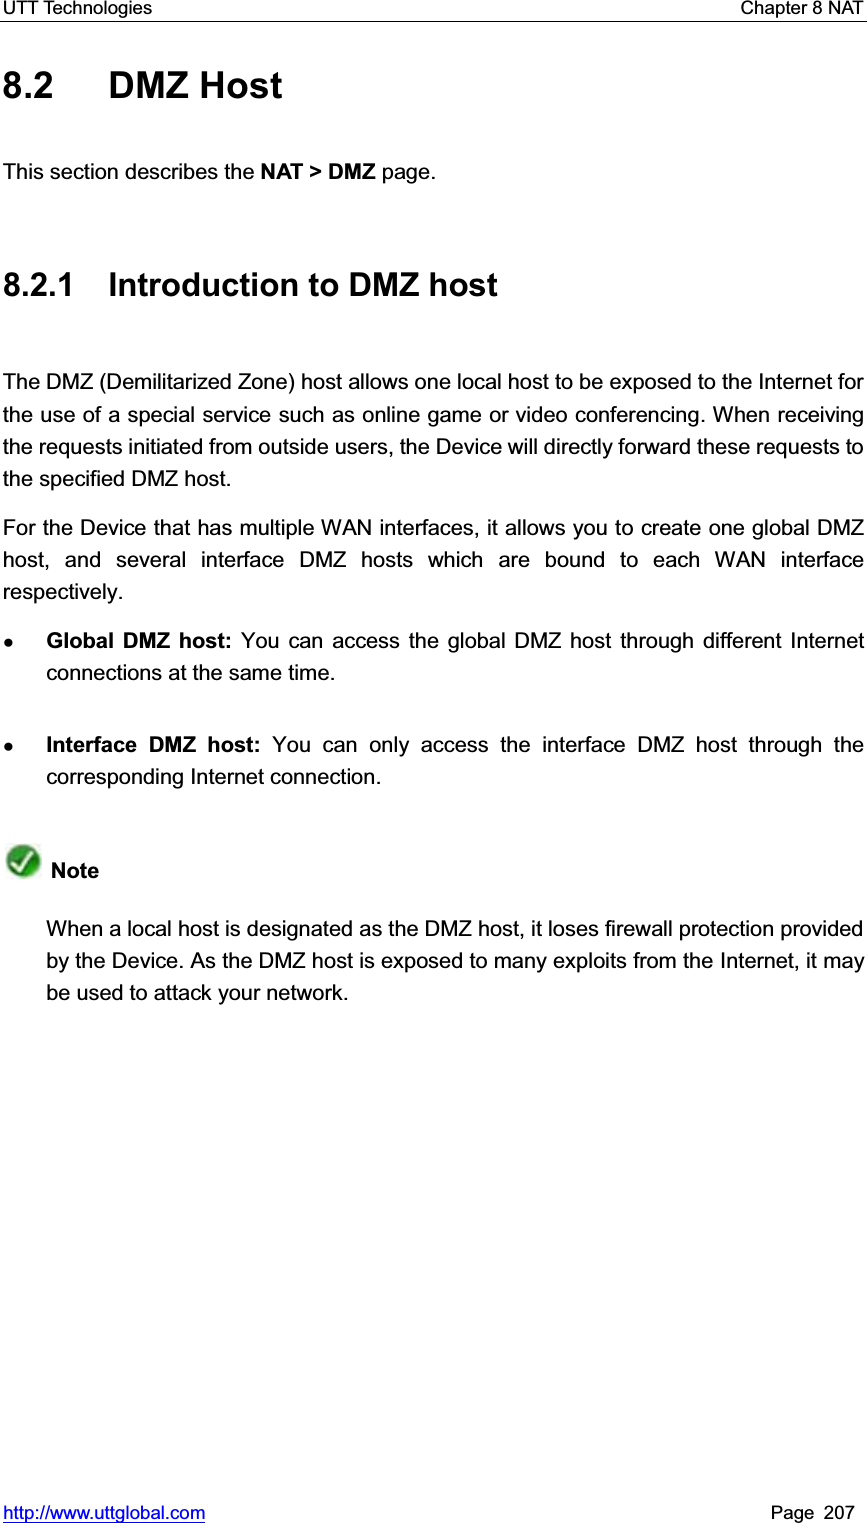 UTT Technologies    Chapter 8 NAT   http://www.uttglobal.com Page 207 8.2 DMZ Host This section describes the NAT &gt; DMZ page. 8.2.1 Introduction to DMZ host The DMZ (Demilitarized Zone) host allows one local host to be exposed to the Internet for the use of a special service such as online game or video conferencing. When receiving the requests initiated from outside users, the Device will directly forward these requests to the specified DMZ host. For the Device that has multiple WAN interfaces, it allows you to create one global DMZ host, and several interface DMZ hosts which are bound to each WAN interface respectively.  ƔGlobal DMZ host: You can access the global DMZ host through different Internet connections at the same time. ƔInterface DMZ host: You can only access the interface DMZ host through the corresponding Internet connection.NoteWhen a local host is designated as the DMZ host, it loses firewall protection provided by the Device. As the DMZ host is exposed to many exploits from the Internet, it may be used to attack your network. 